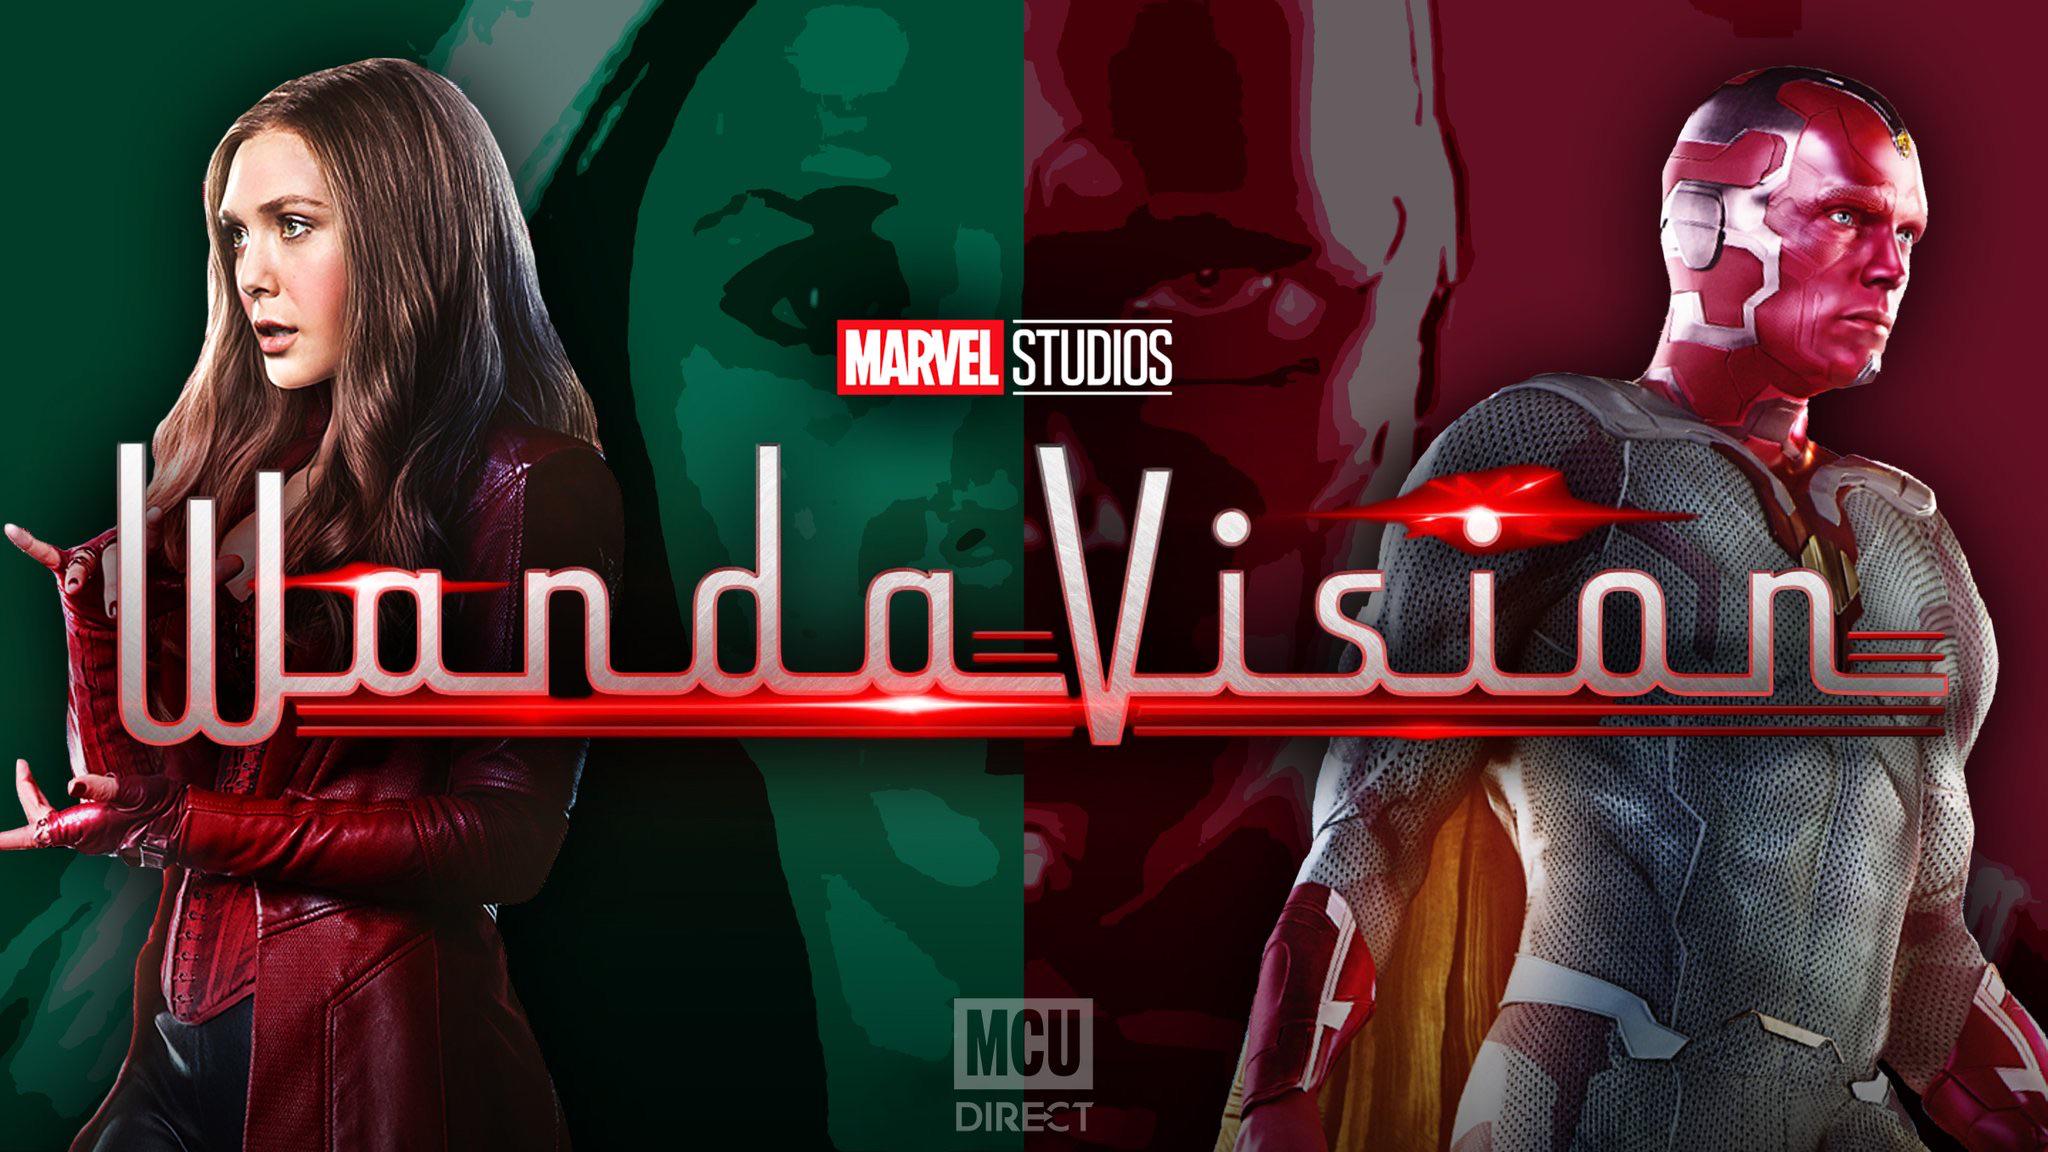 OFFICIAL: The release of the Wanda Vision series has been moved up from Early 2021 to this year in 2020!